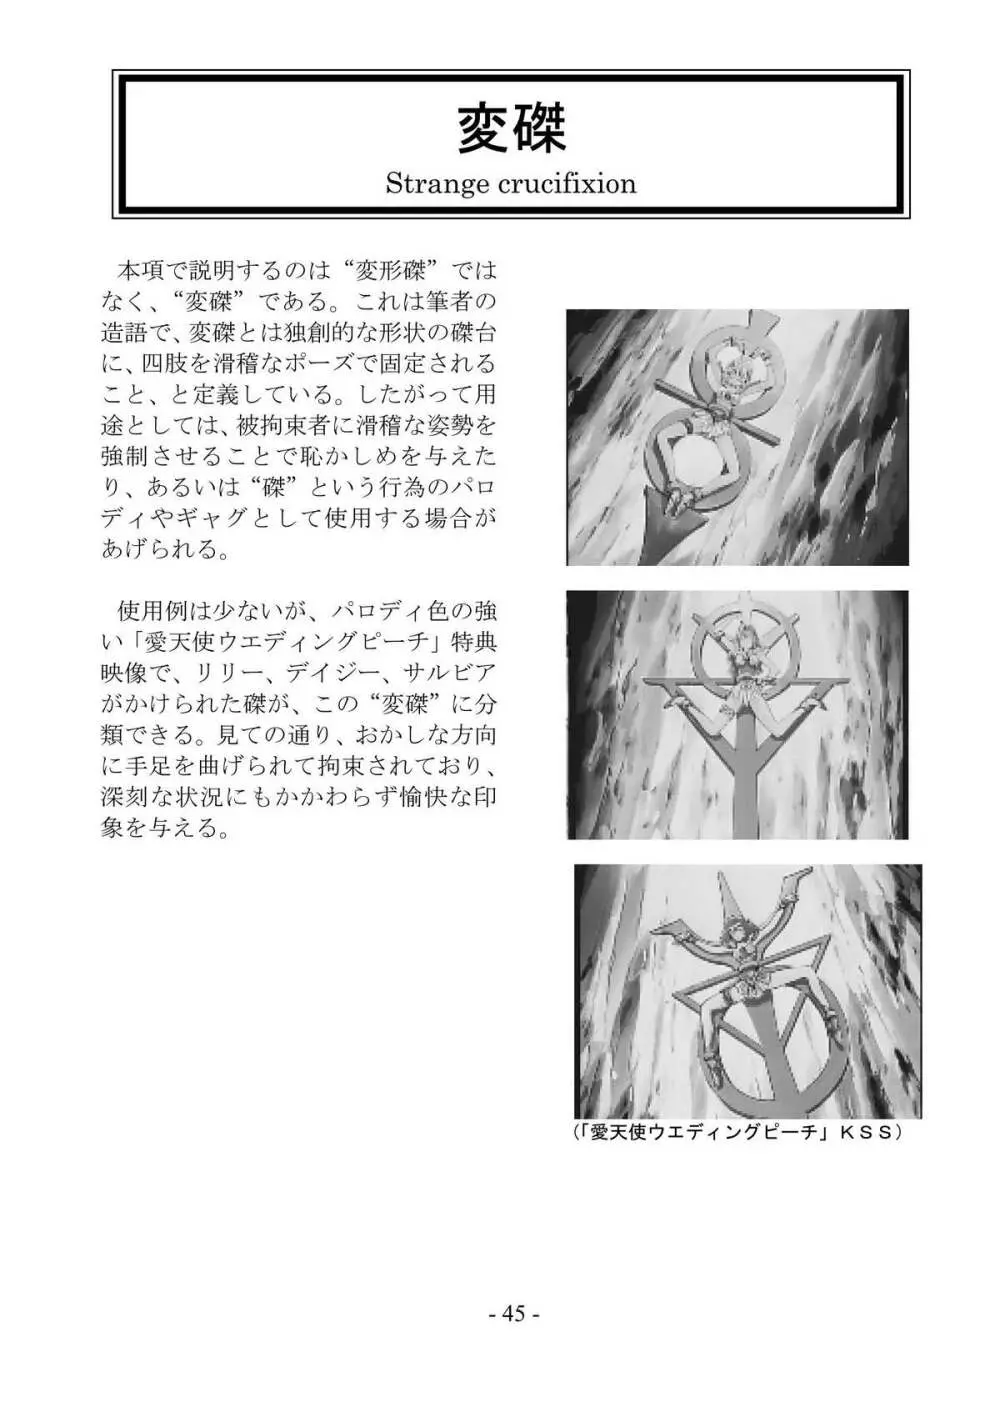 encyclopedia of crucifixion Page.46